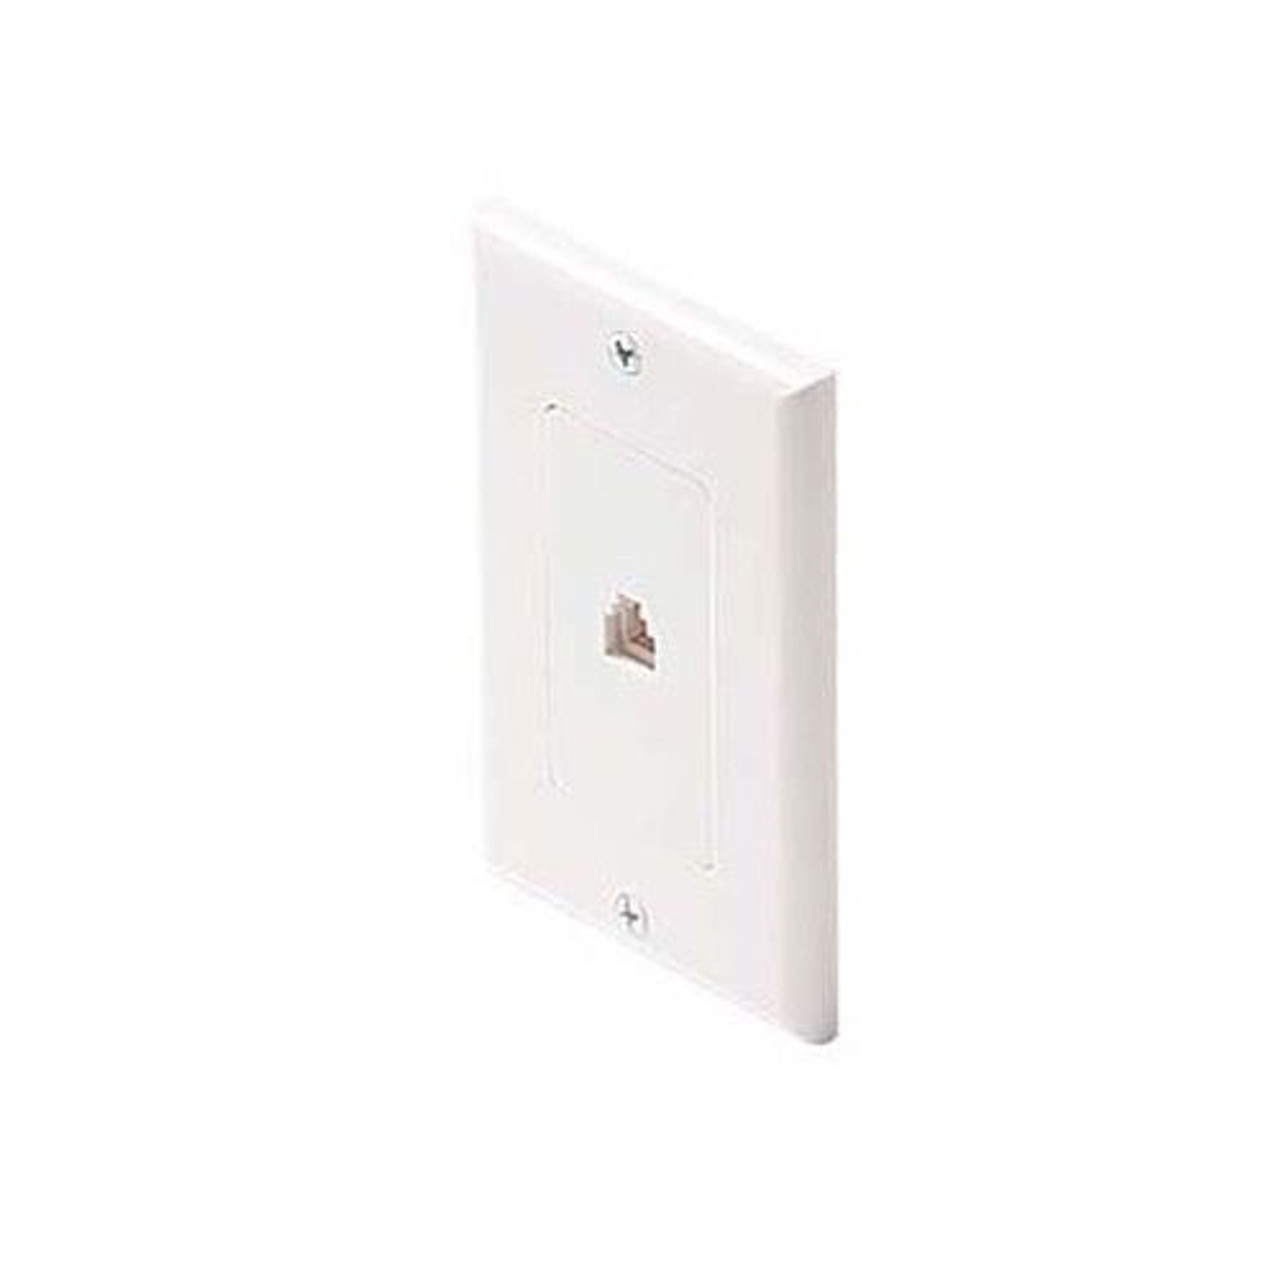 Steren 300-003WH Telephone Wall Plate White Decorator Style RJ11 4-Conductor Single Gang Flush Jack Single Phone Wall Plate 6P4C Jack Modular RJ11 Duplex Telephone Line Cord Audio Data Signal 1 Outlet, Part # 300003-WH